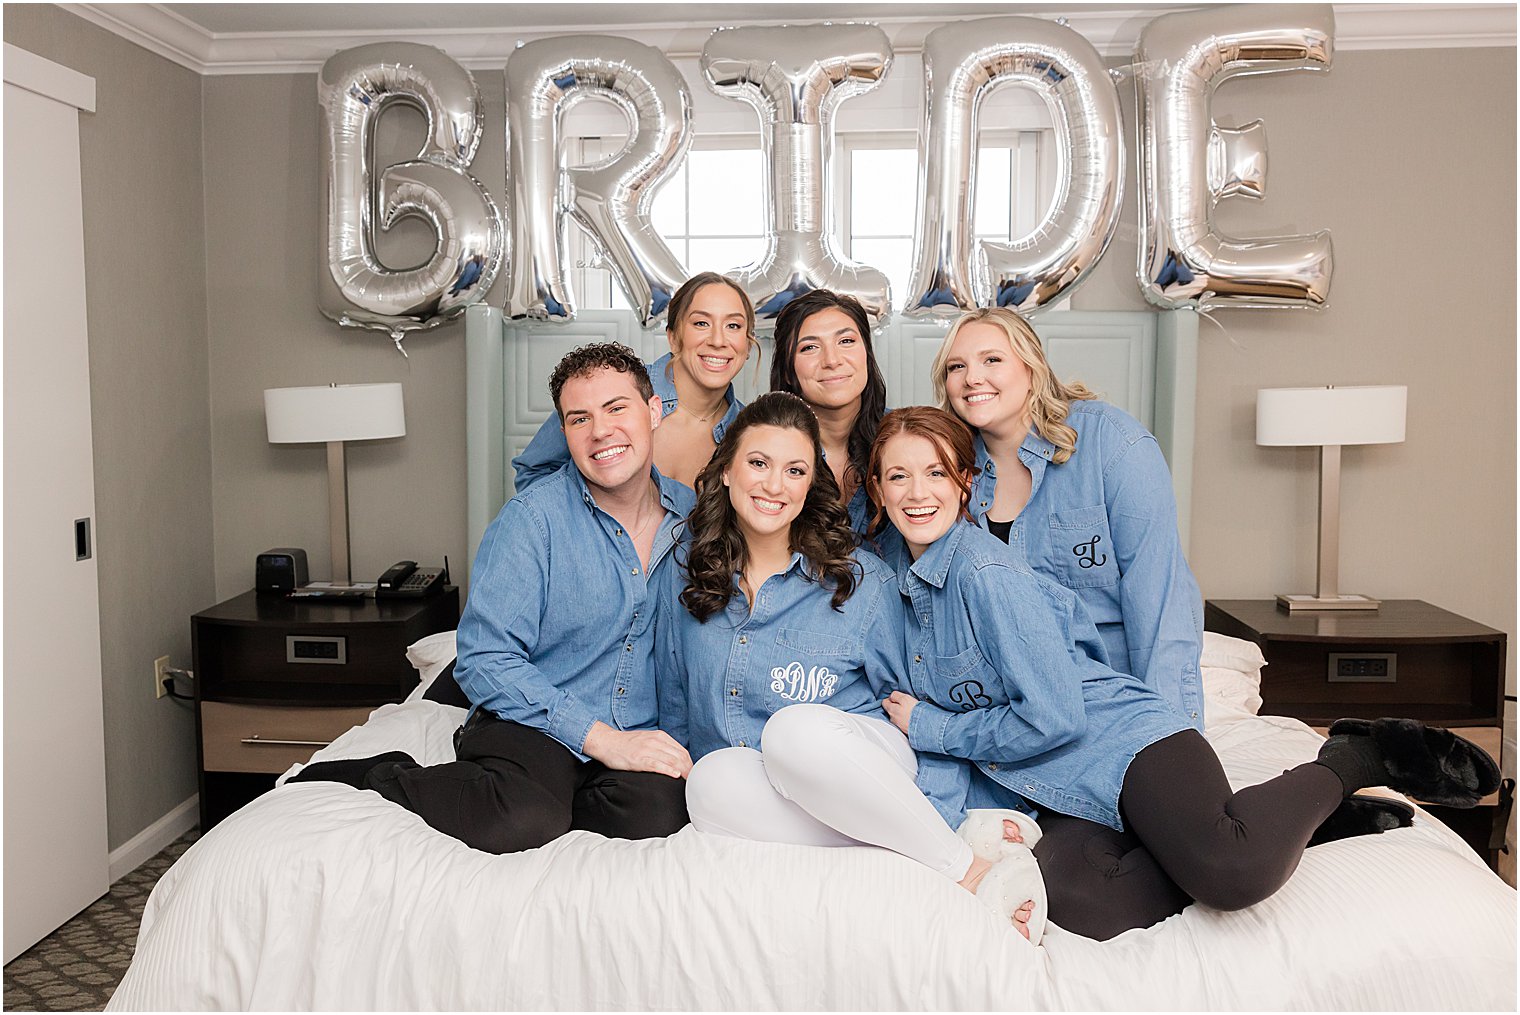 bride poses with bridesmaids in custom monogramed shirts under BRIDE balloons 